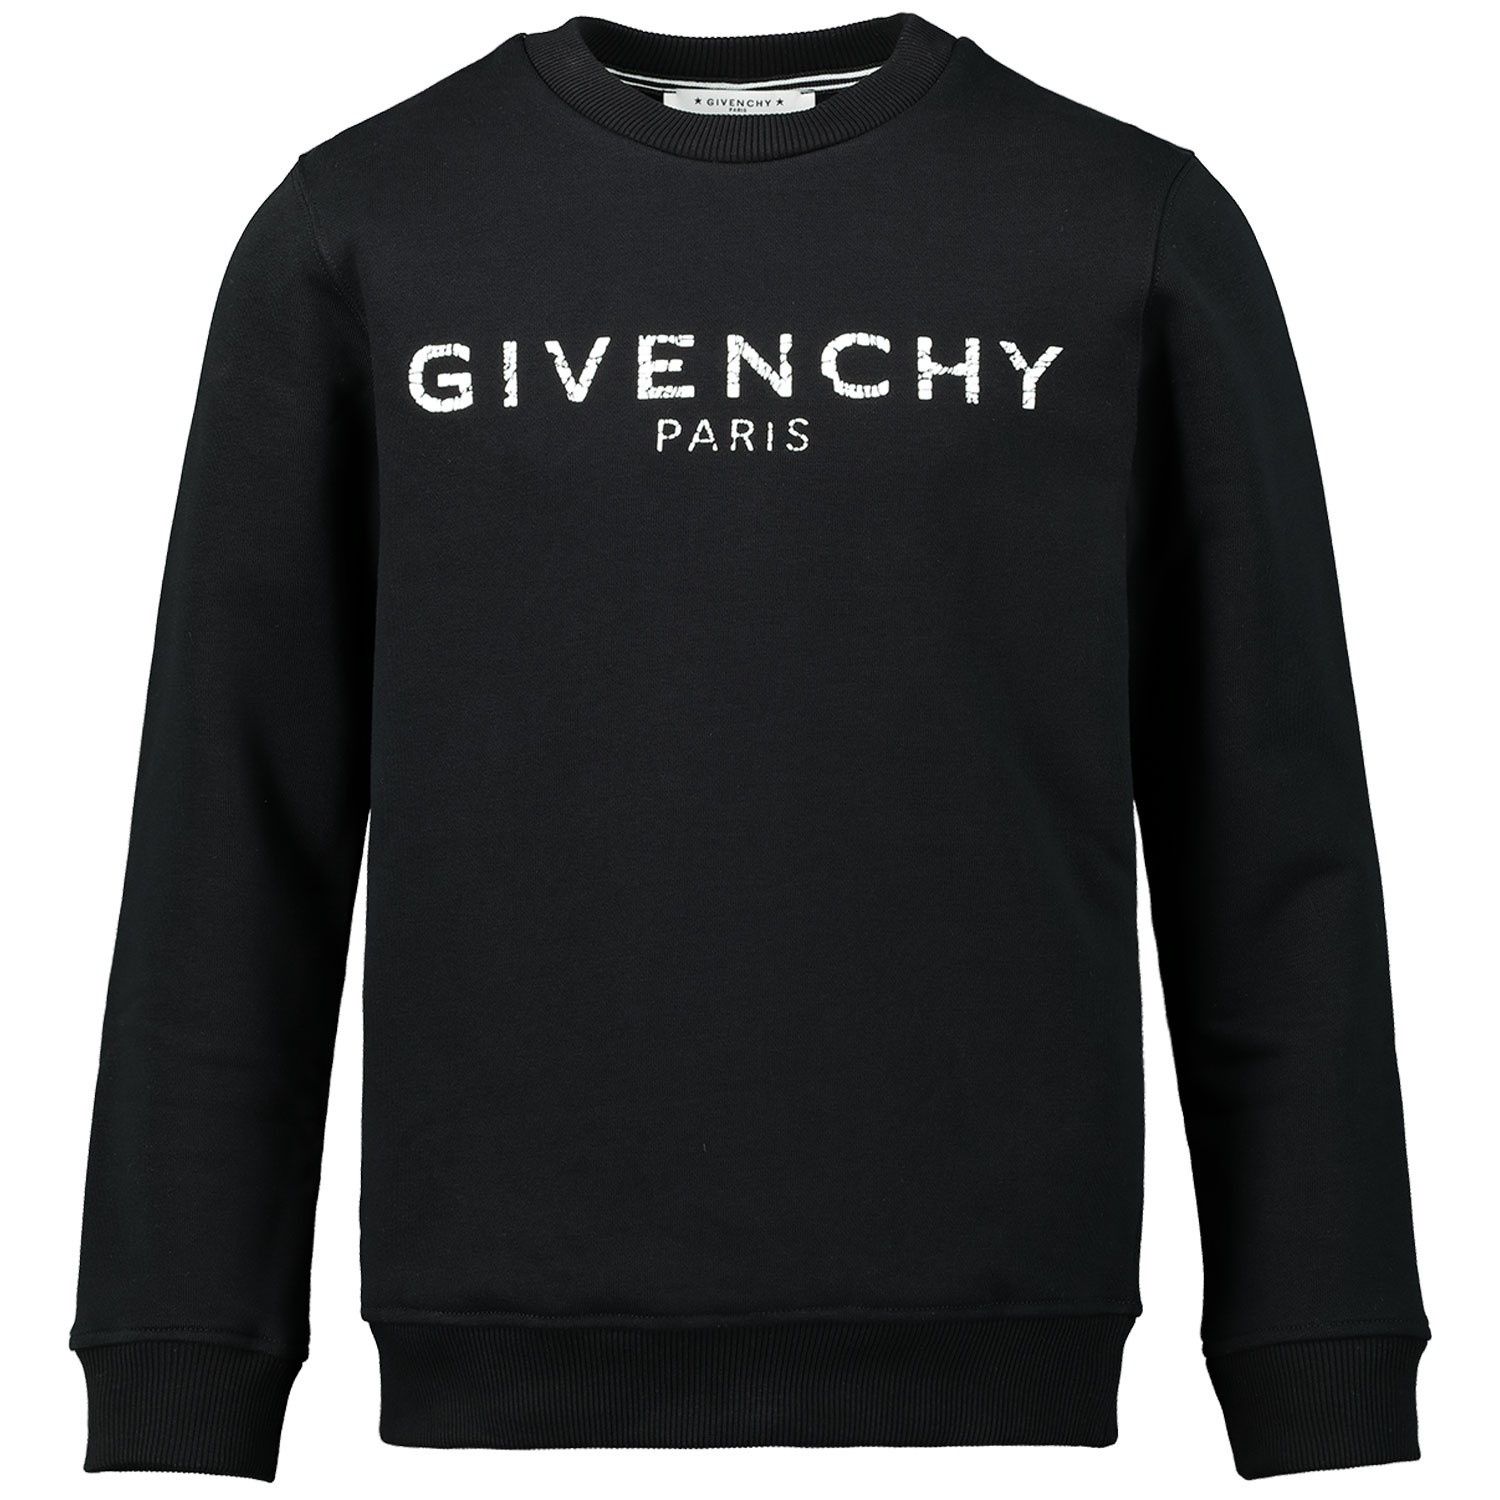 givenchy kids sweater